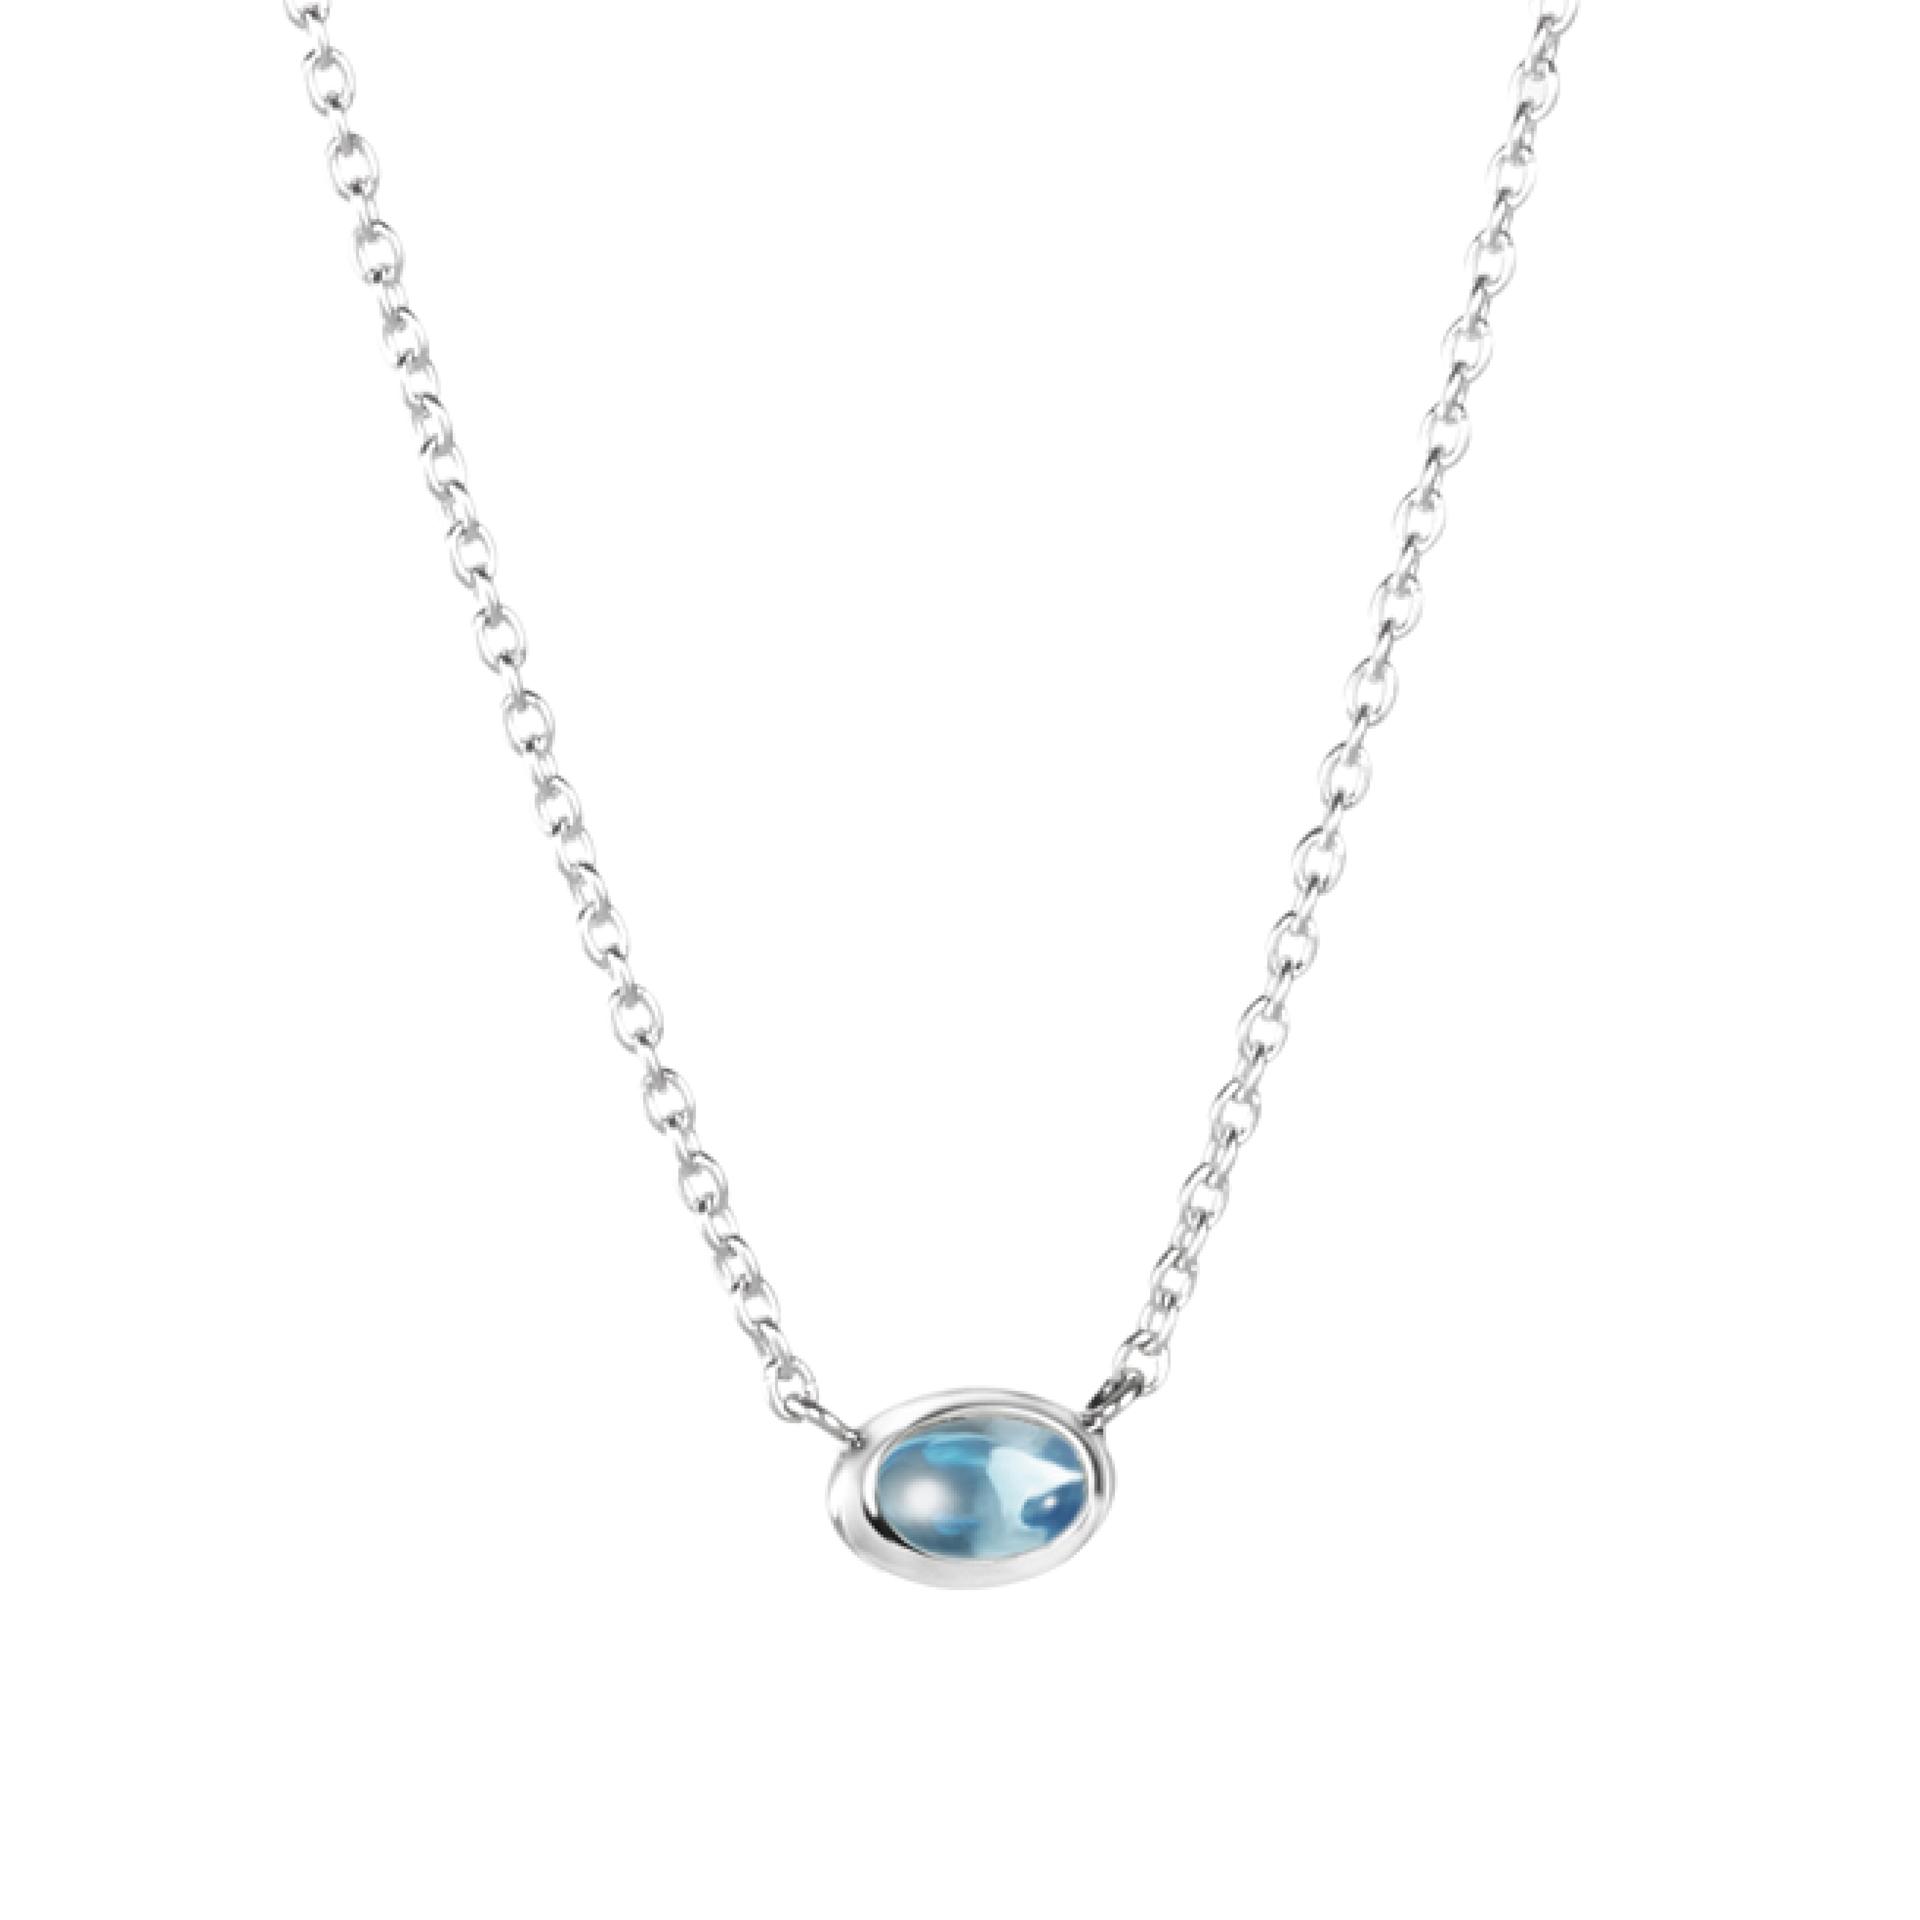 LOVE BEAD NECKLACE SILVER - TOPAZ